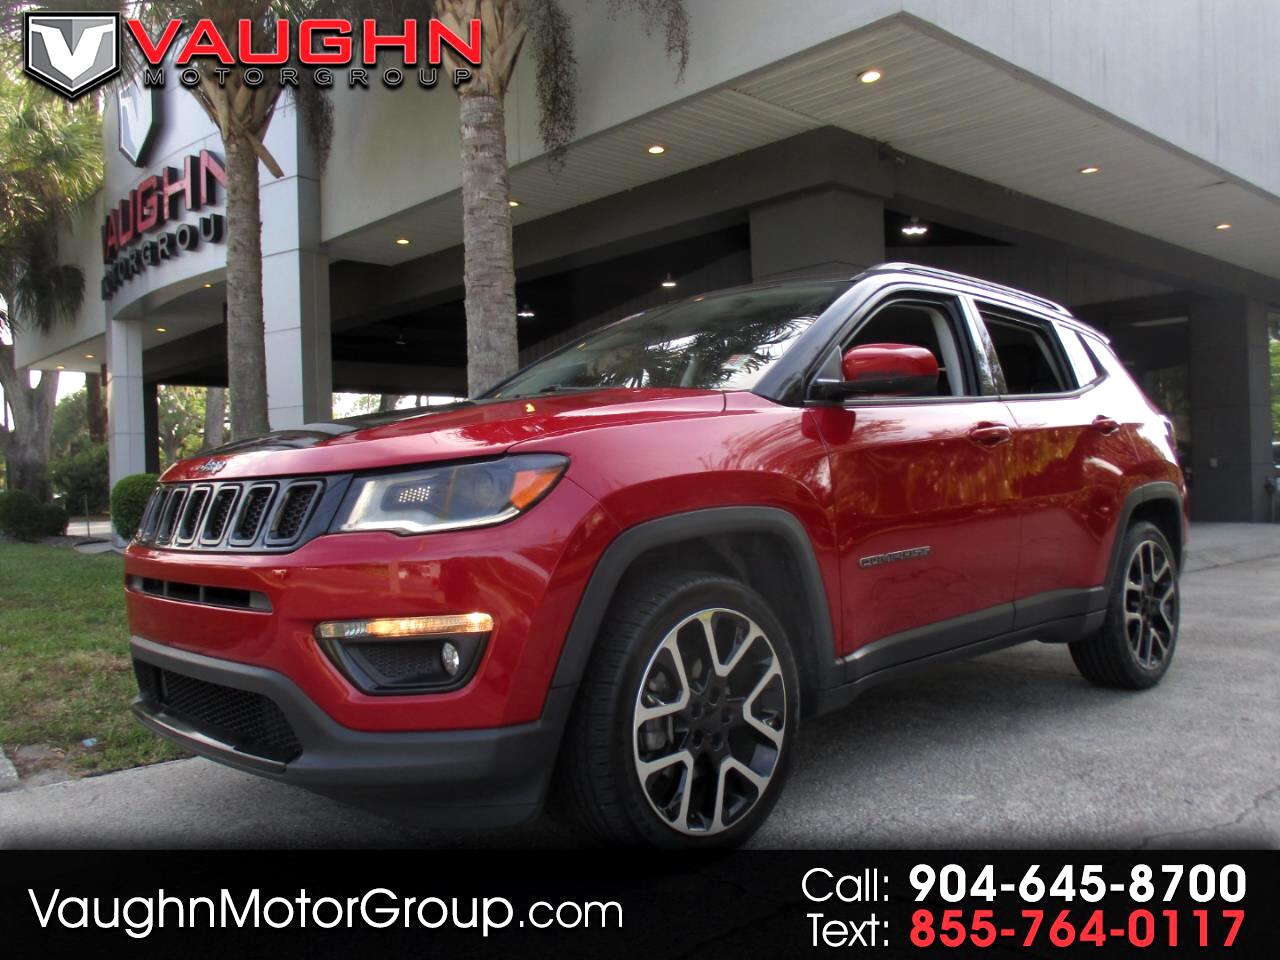 Jeep Compass Limited FWD 2018